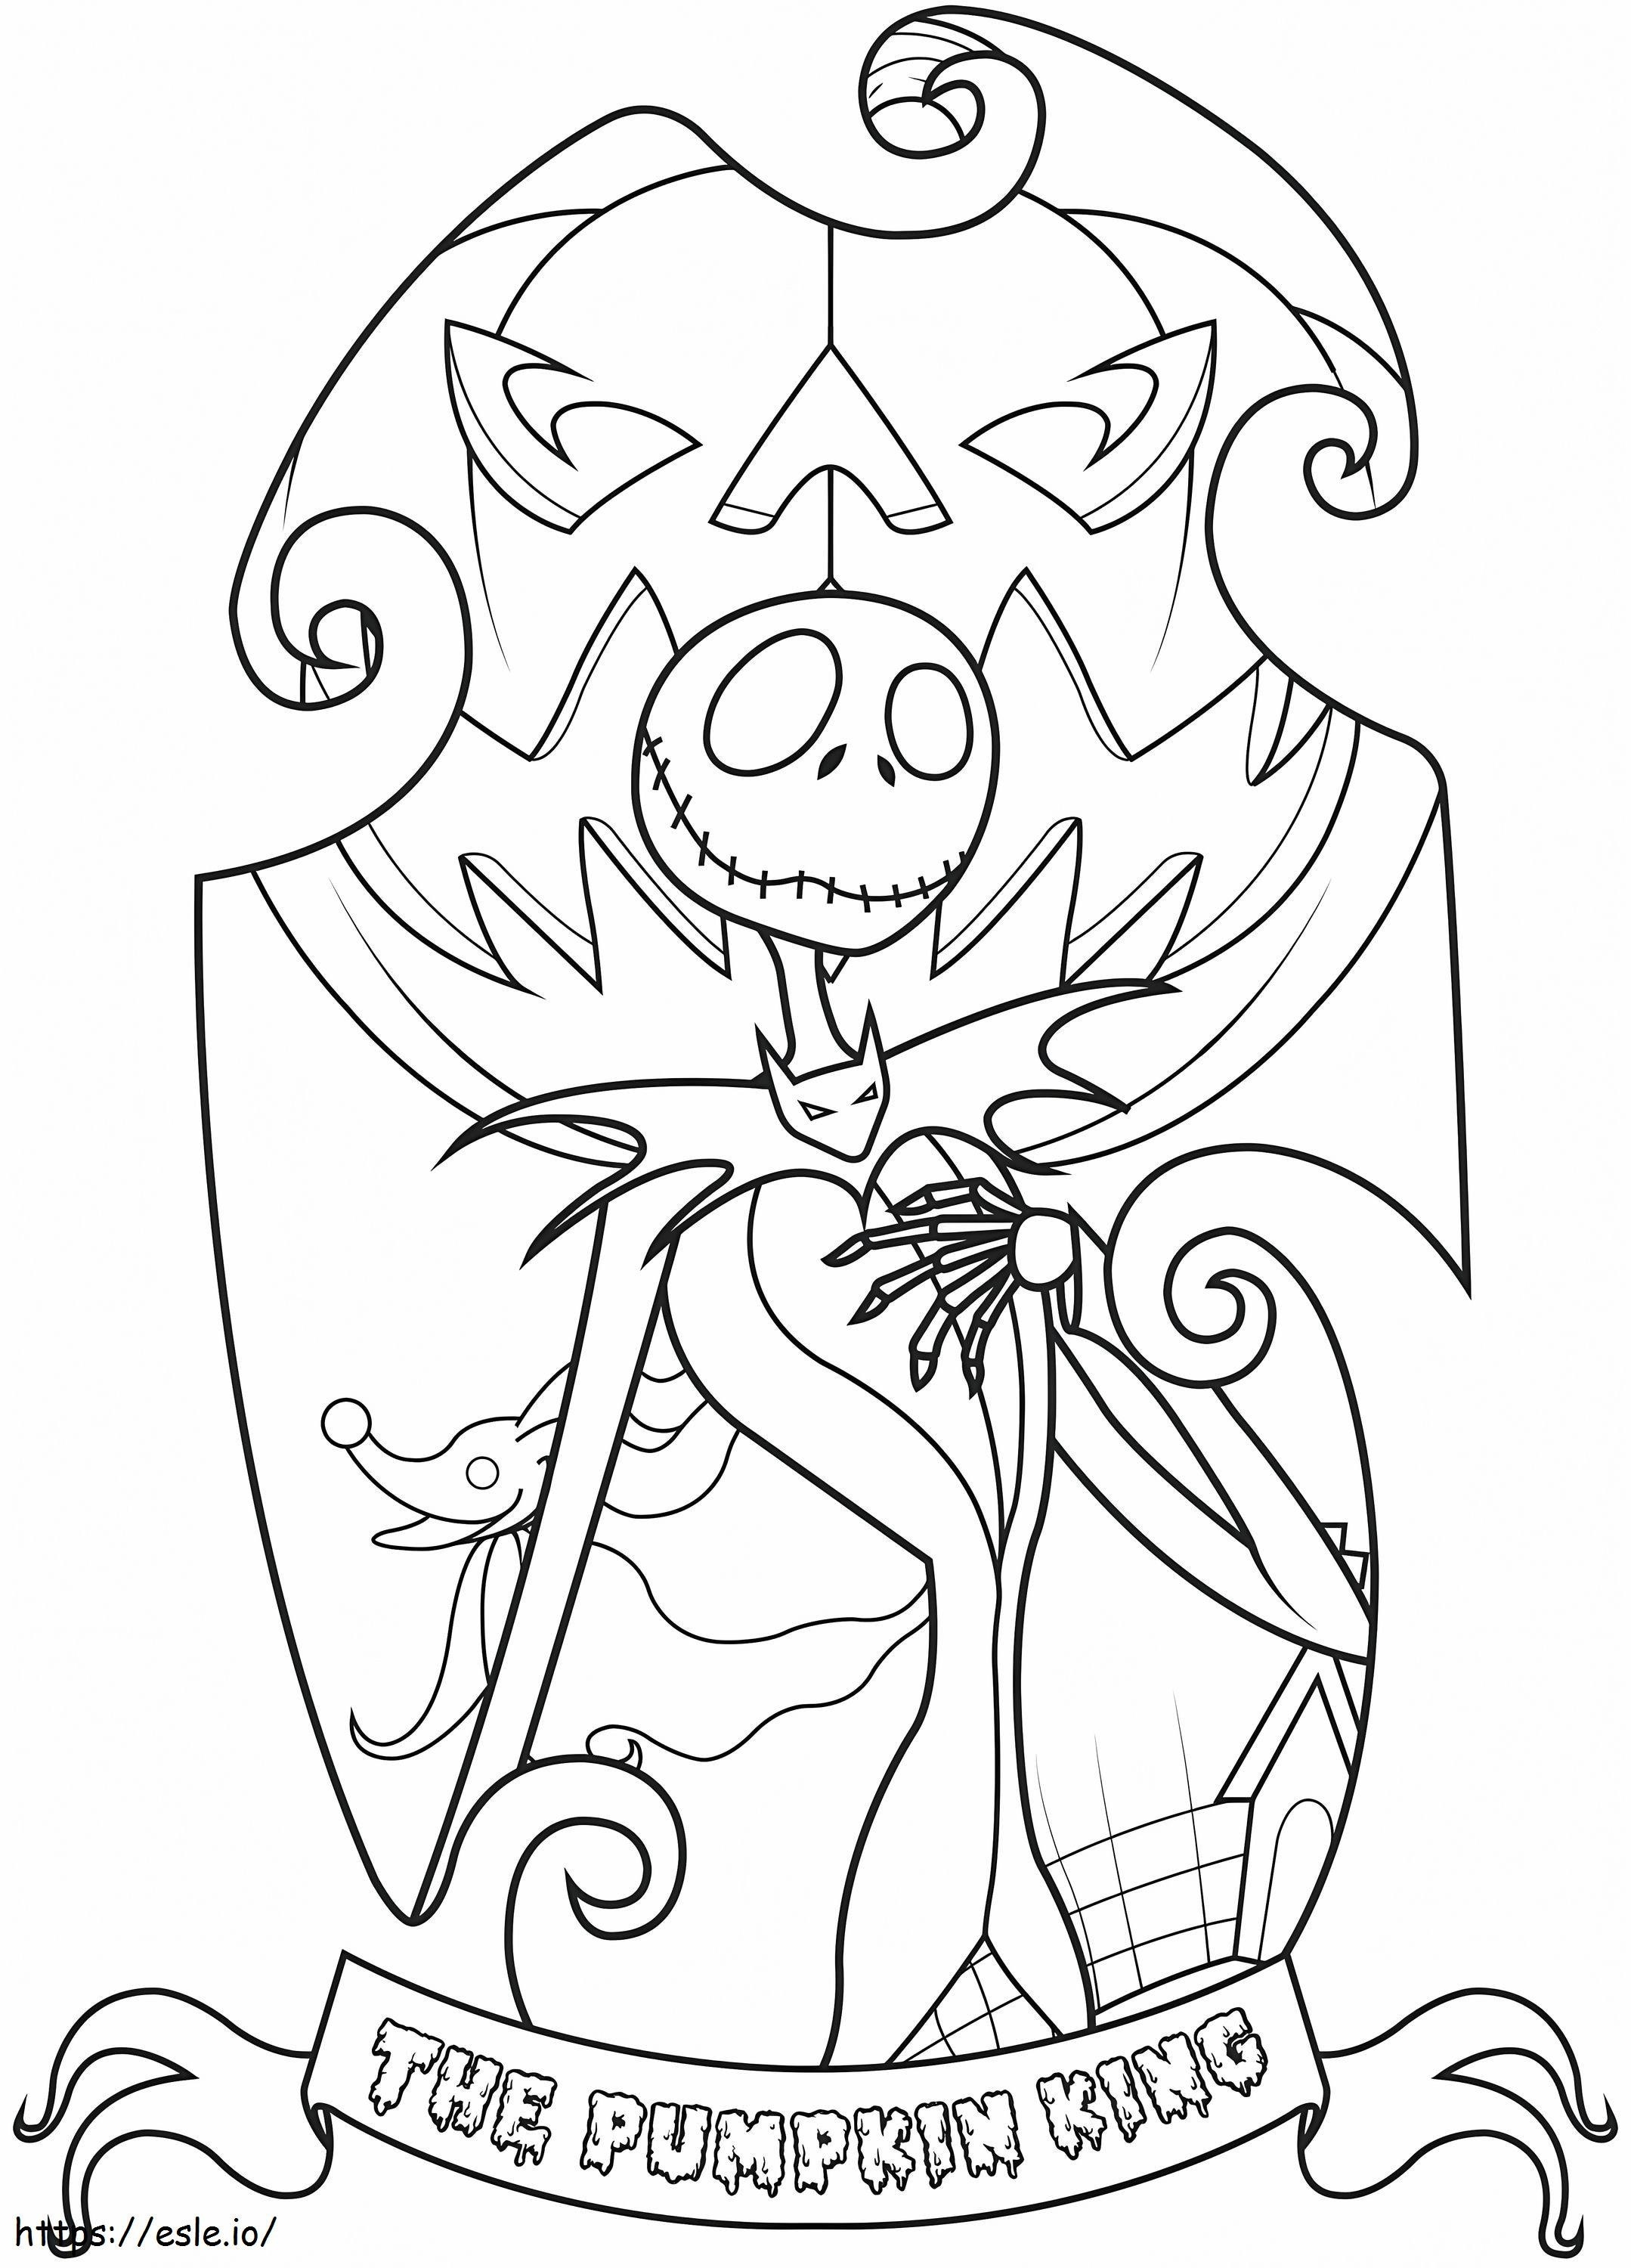 1574990638 Coloring Jack Skellington King Of Halloween Town Simple coloring page